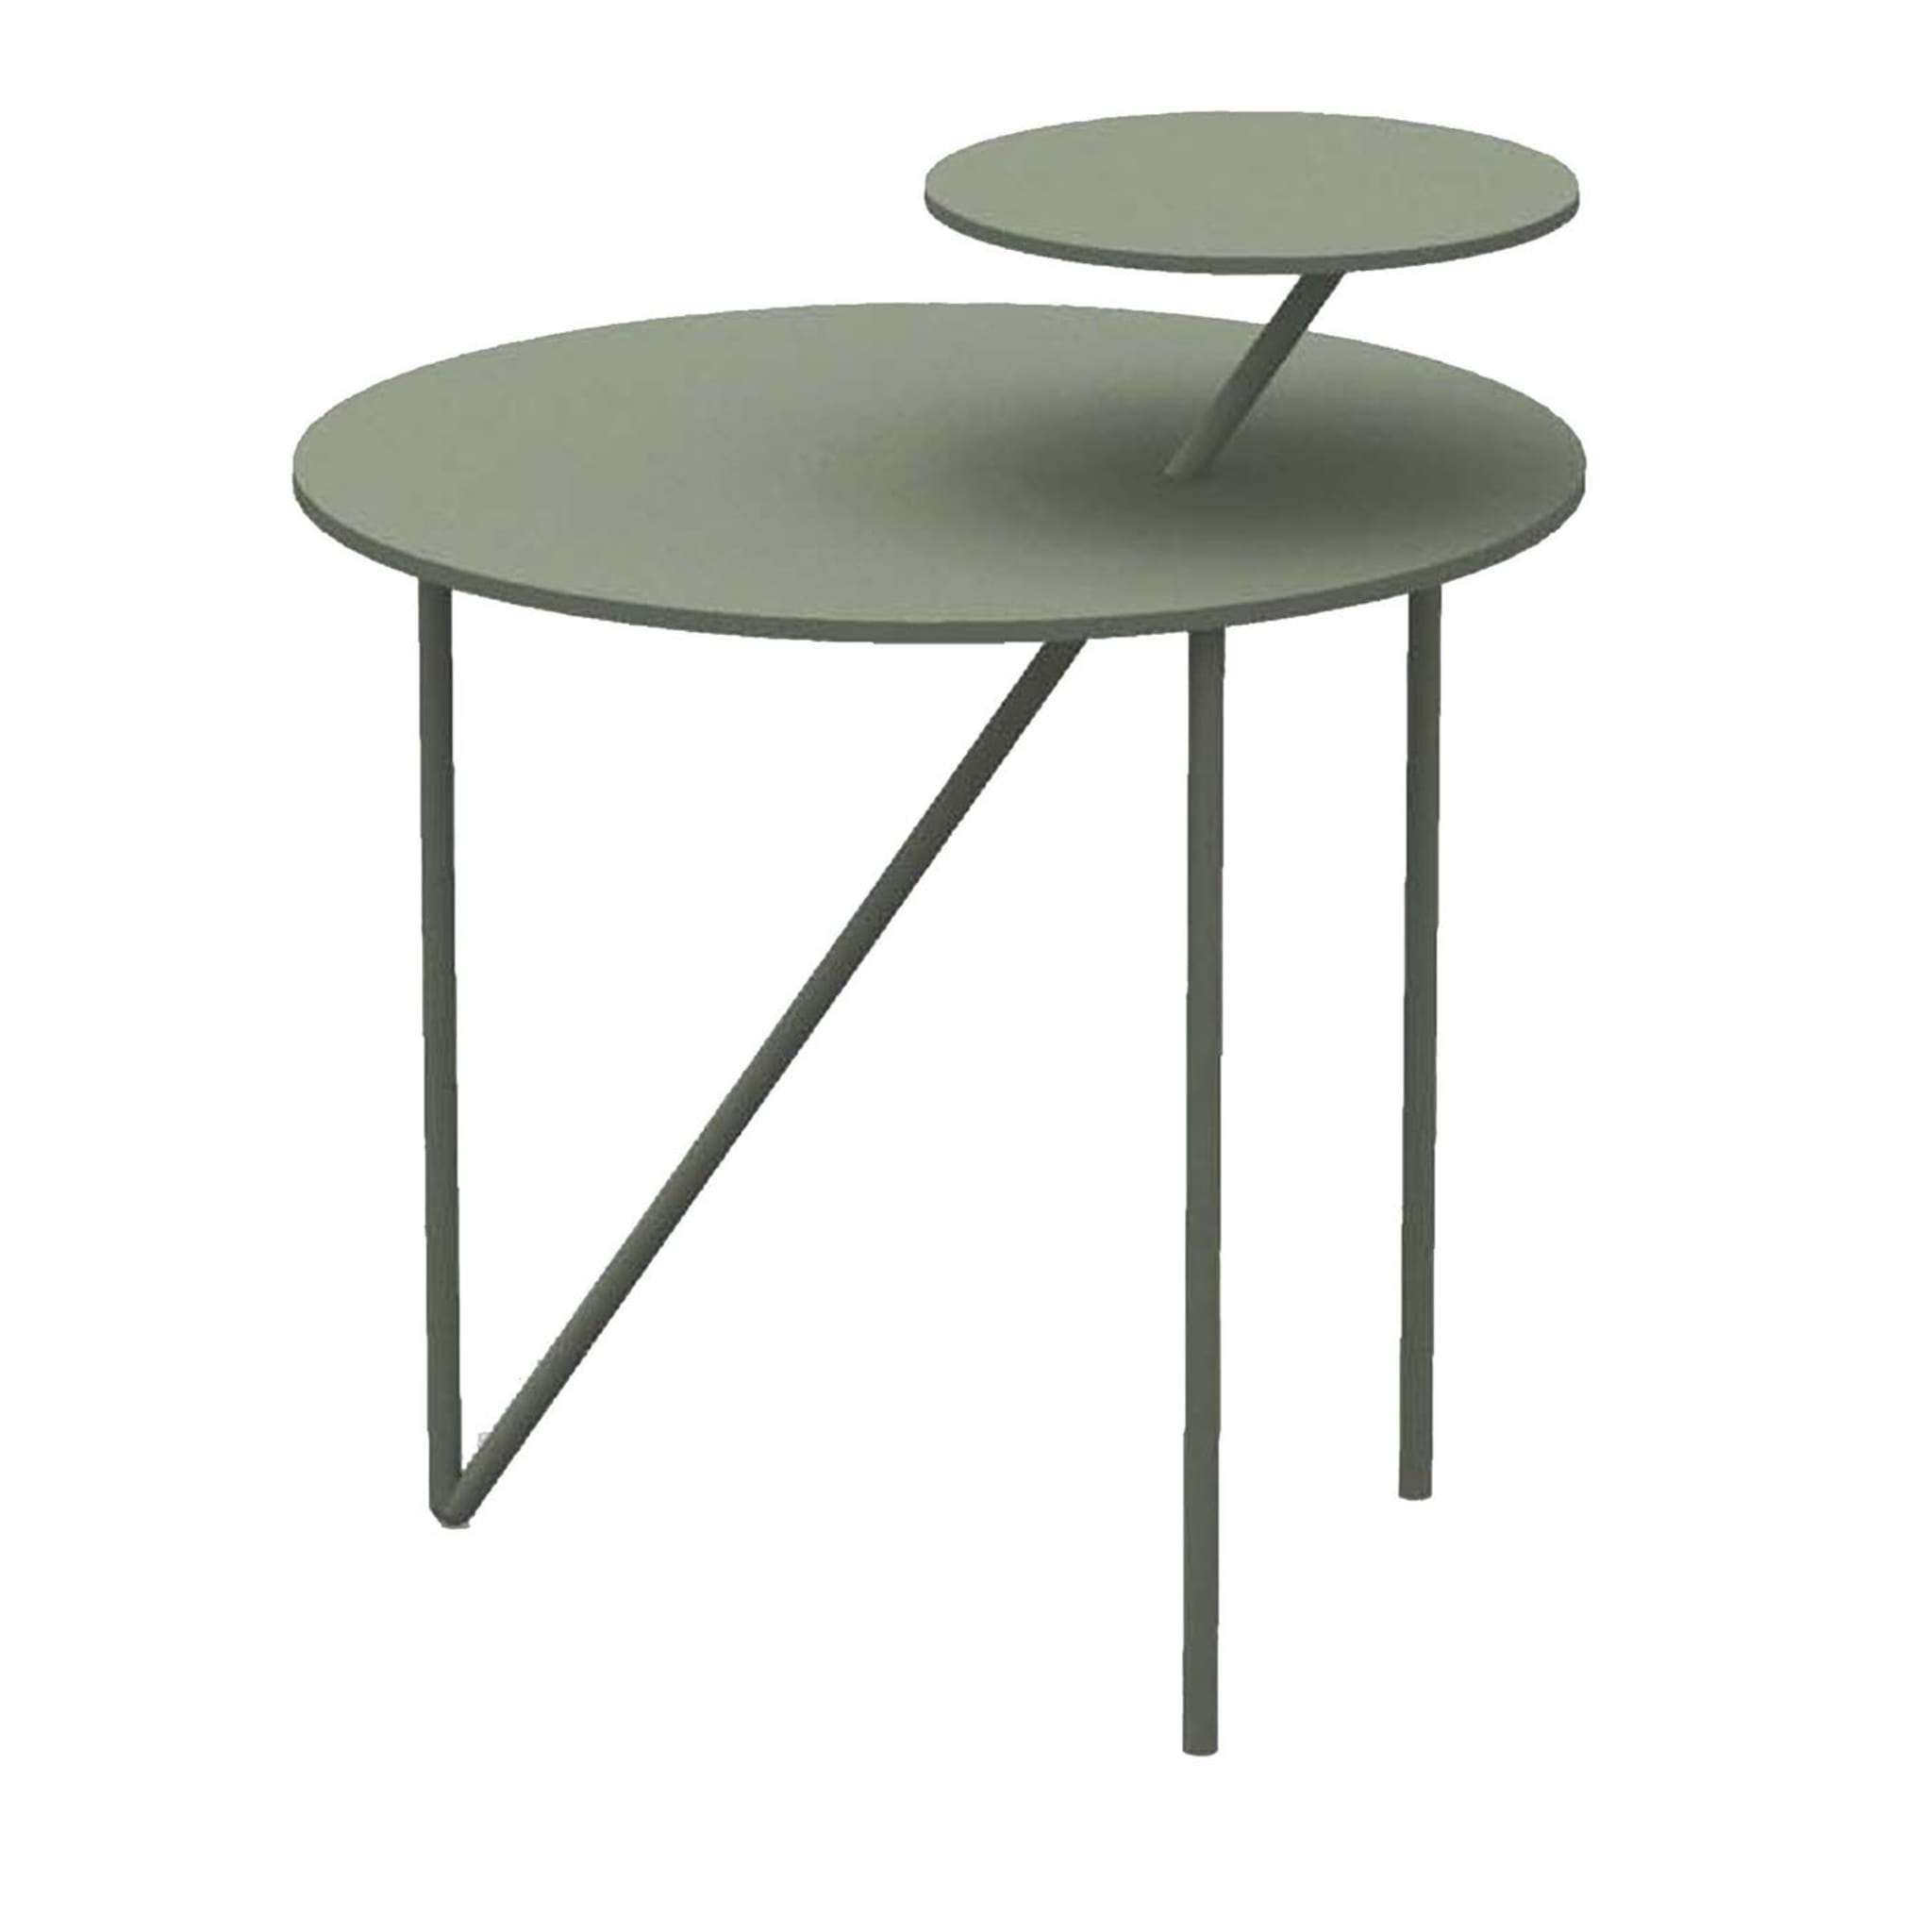 Passante Low Sage Green Coffee Table - Alternative view 1